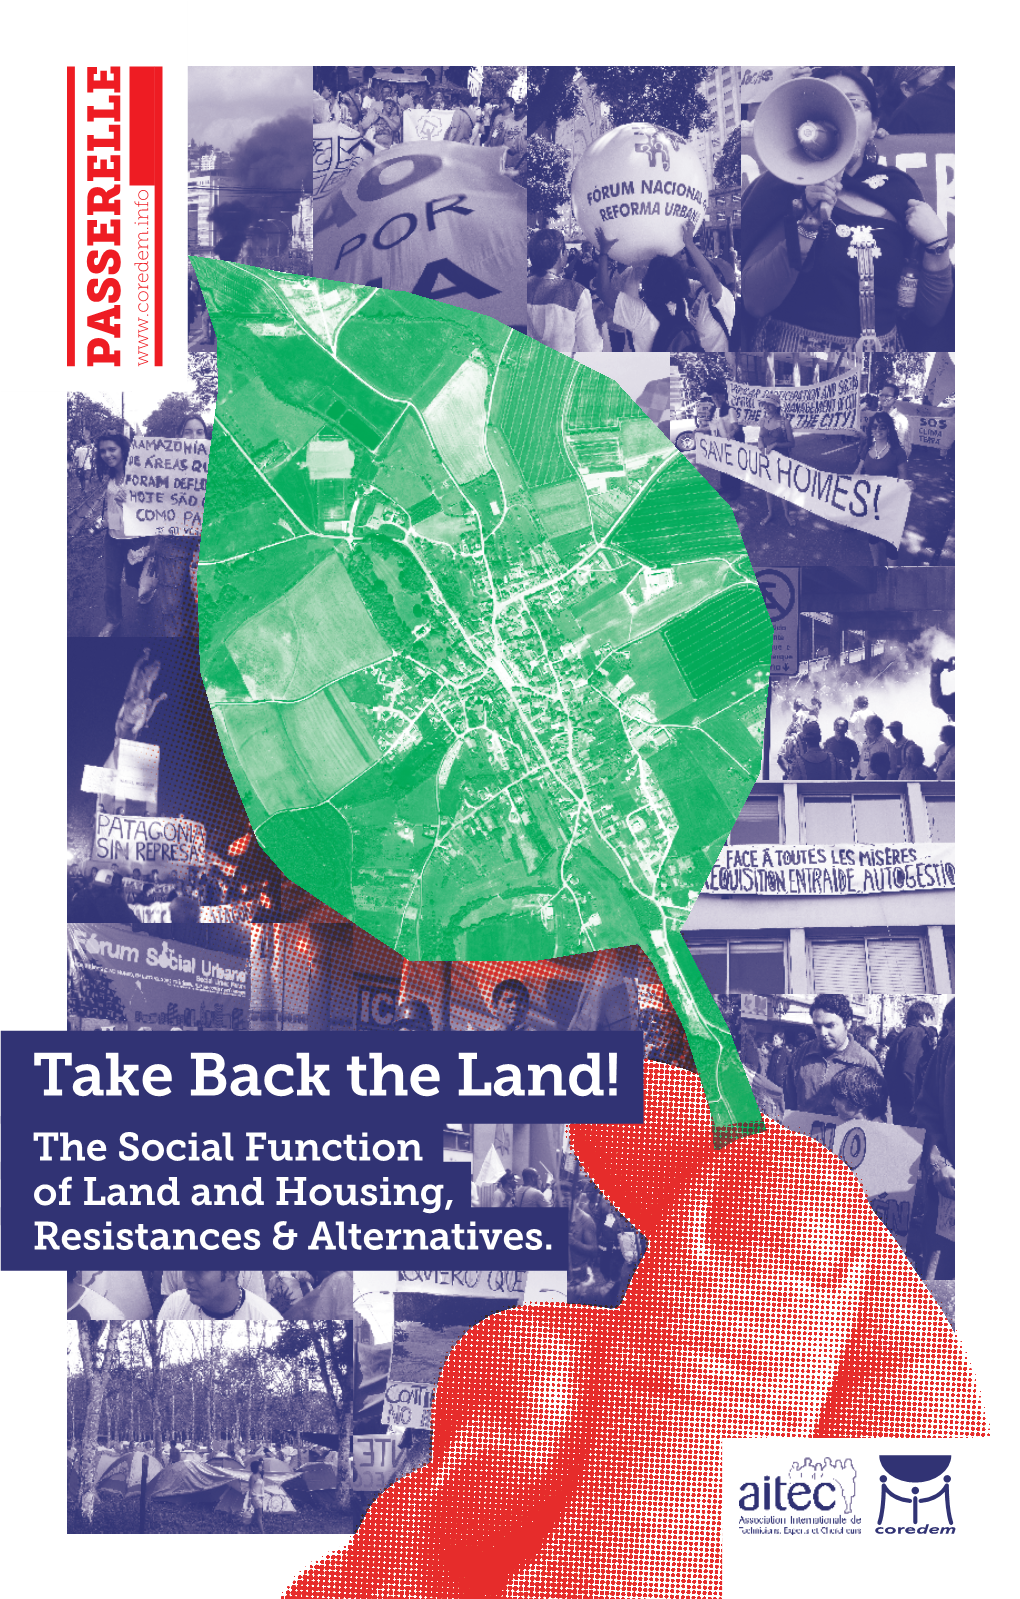 Take Back the Land! the Social Function of Land and Housing, Resistances & Alternatives